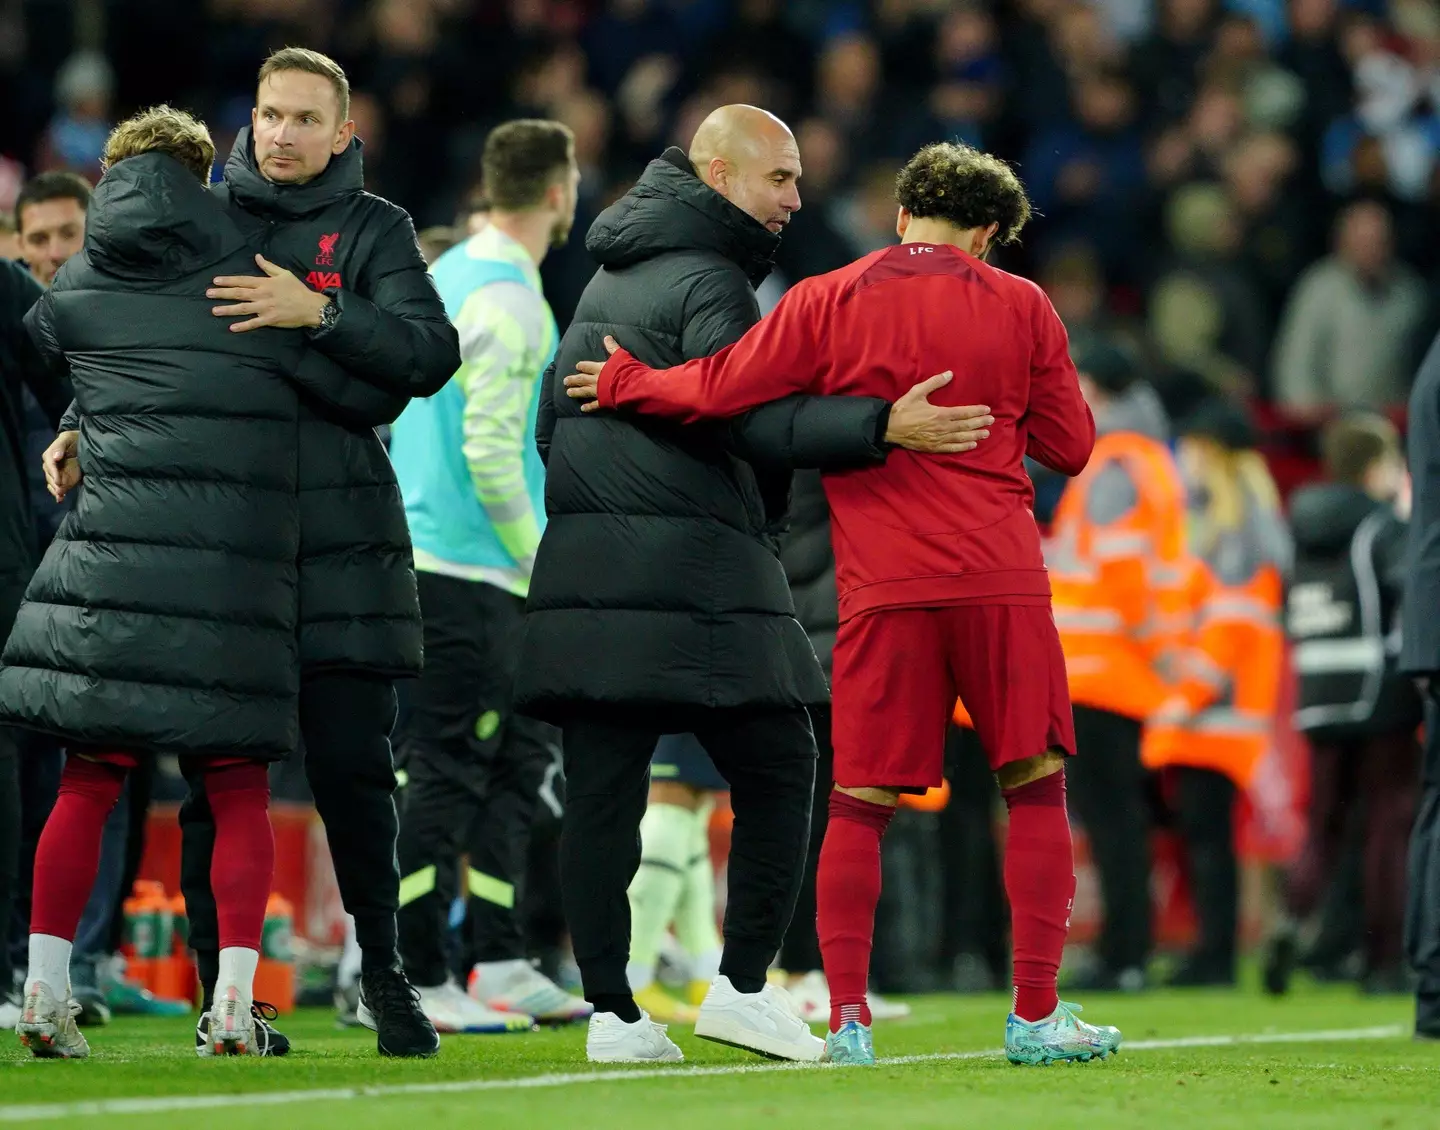 Guardiola and Salah spoke to each other after the match (Image: Alamy)